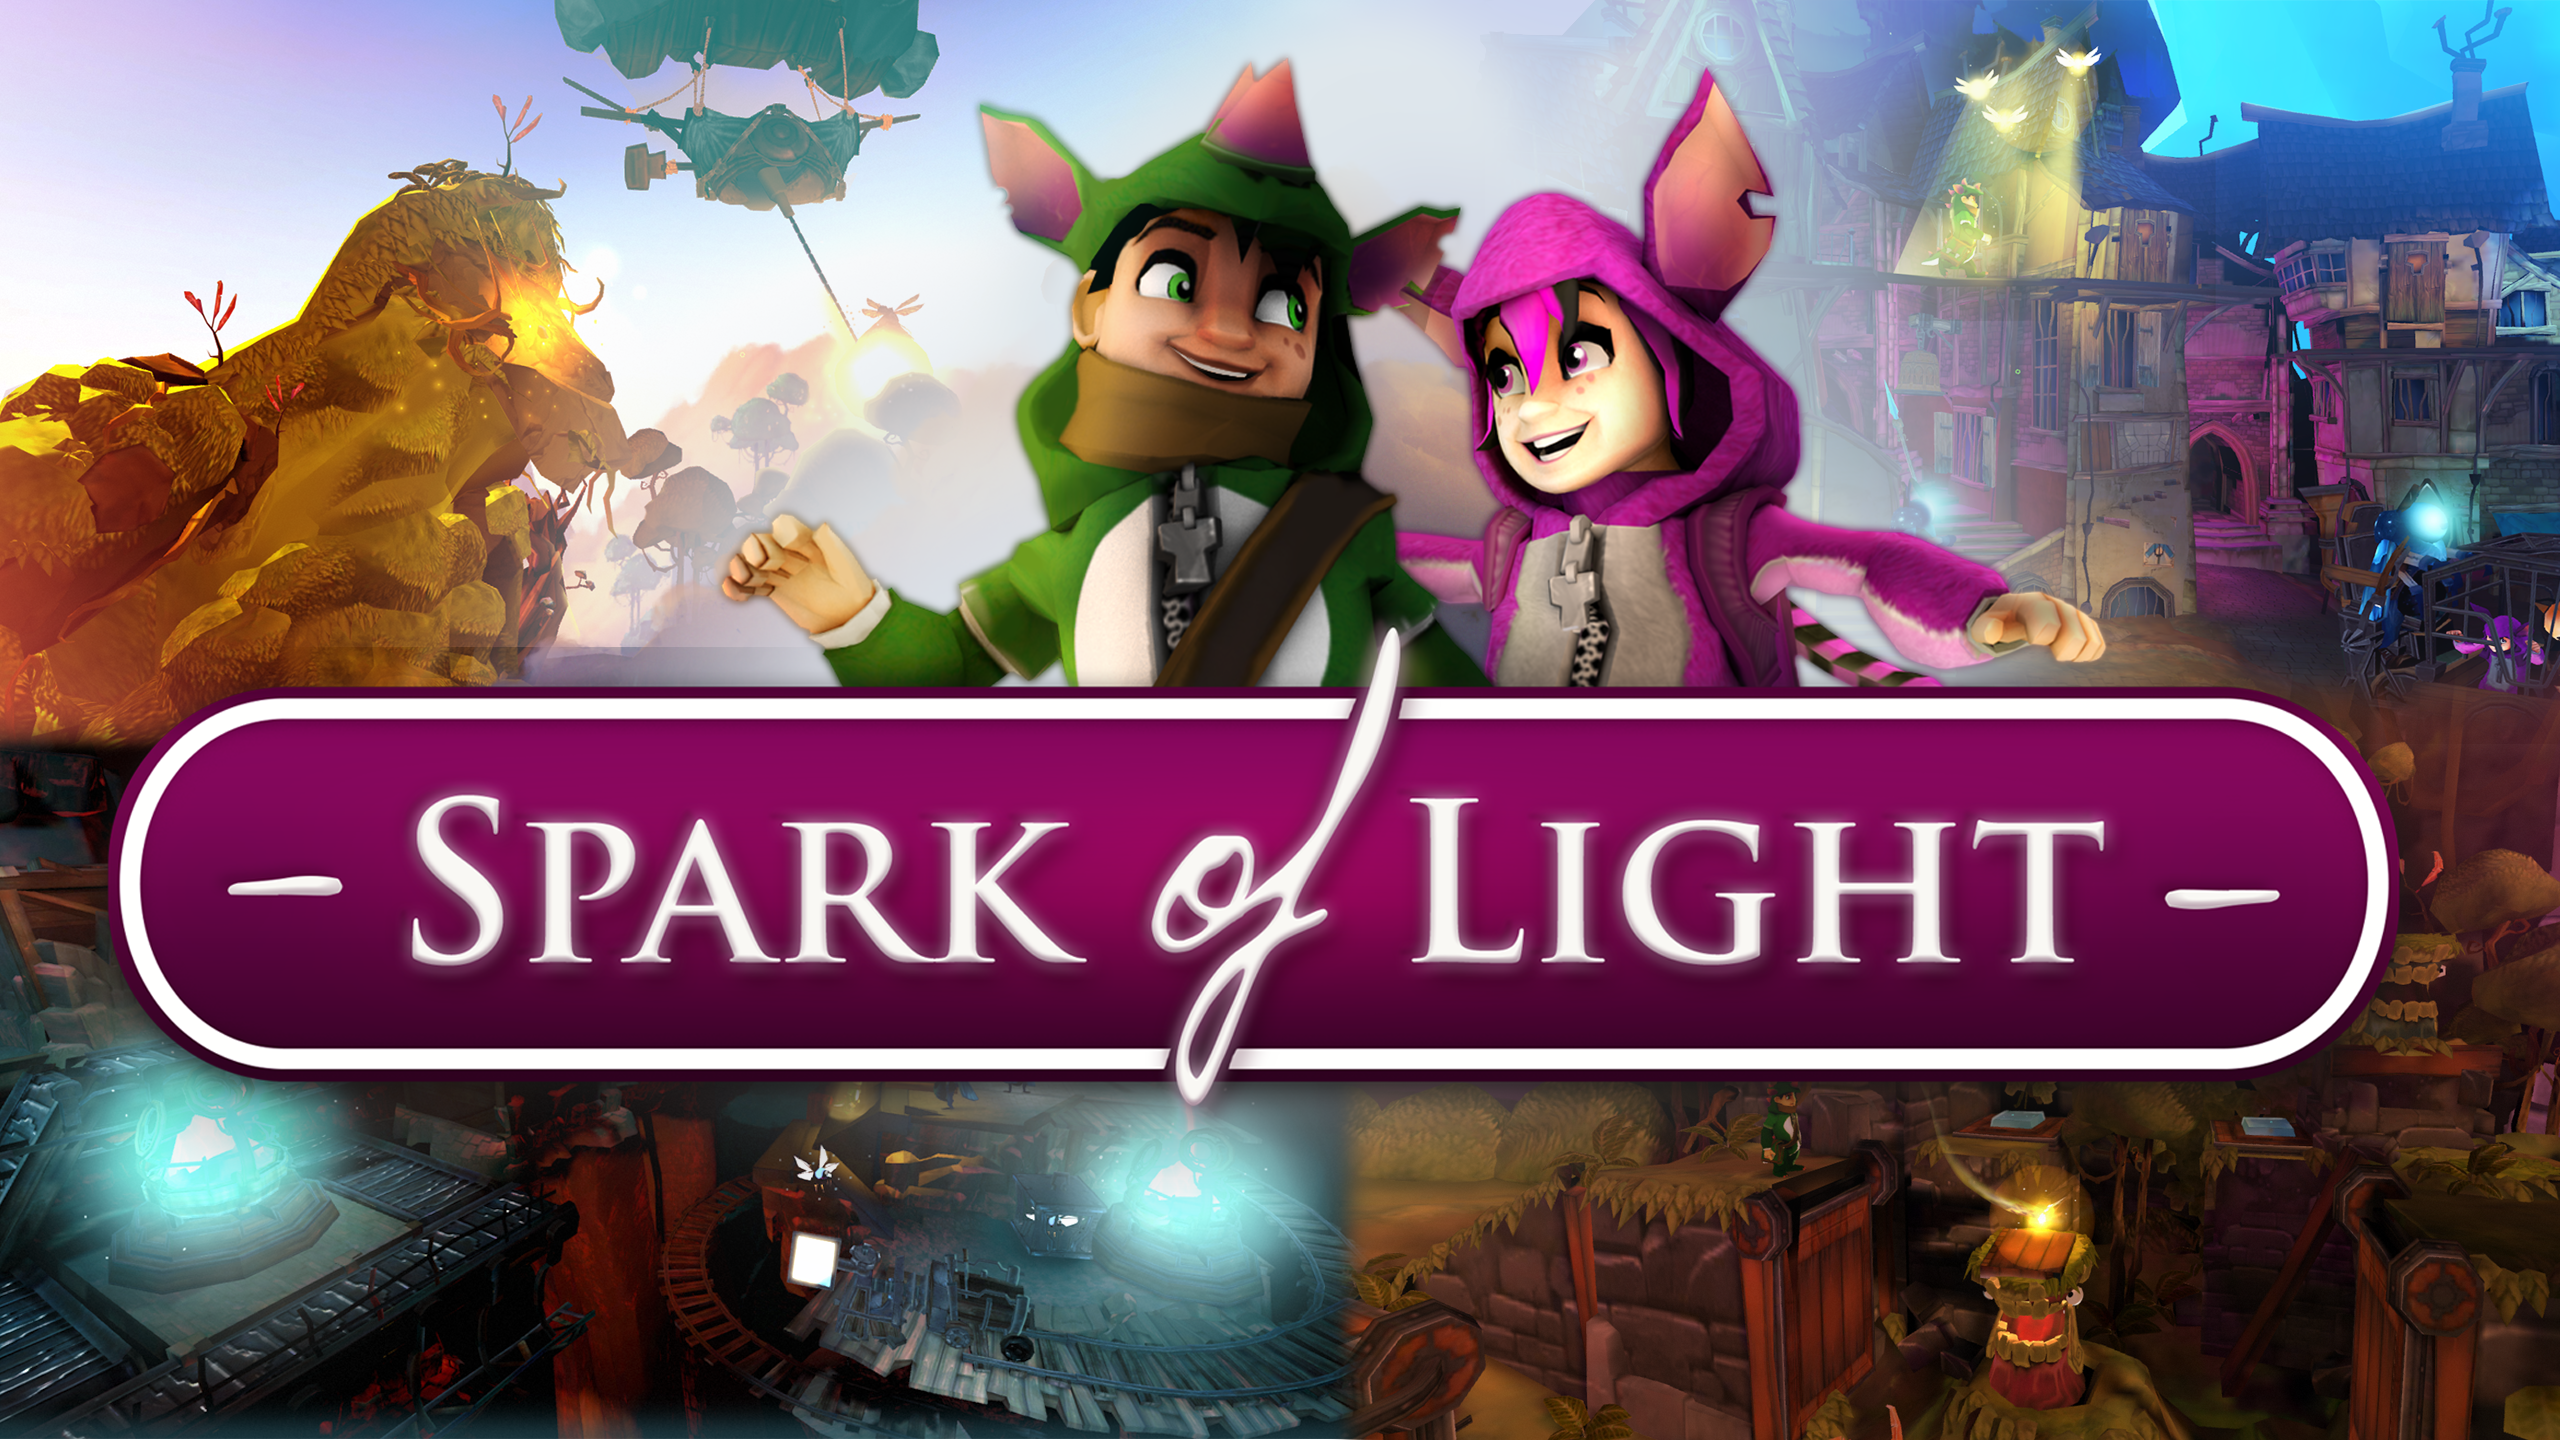 Spark of Light VR puzzle review